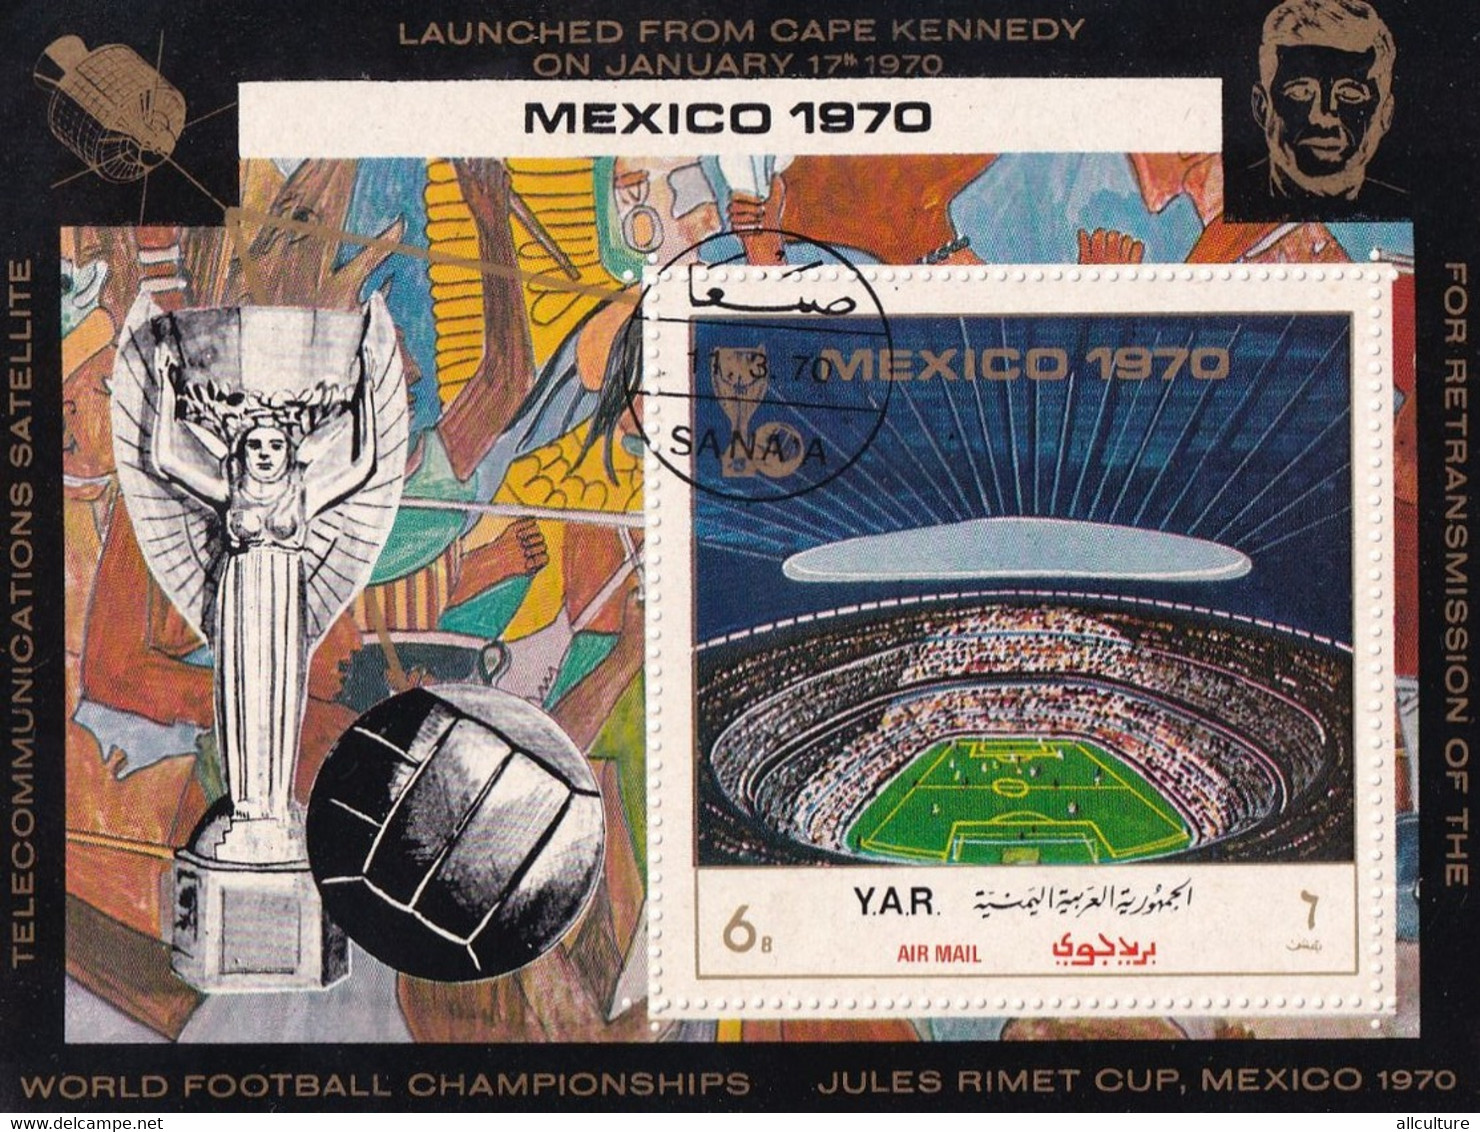 MEXICO 1970  LAUNCHED FROM CAPE KENNEDY ON JUANUARY 1970 JULES RIMET CUP  MNH - 1970 – Mexico